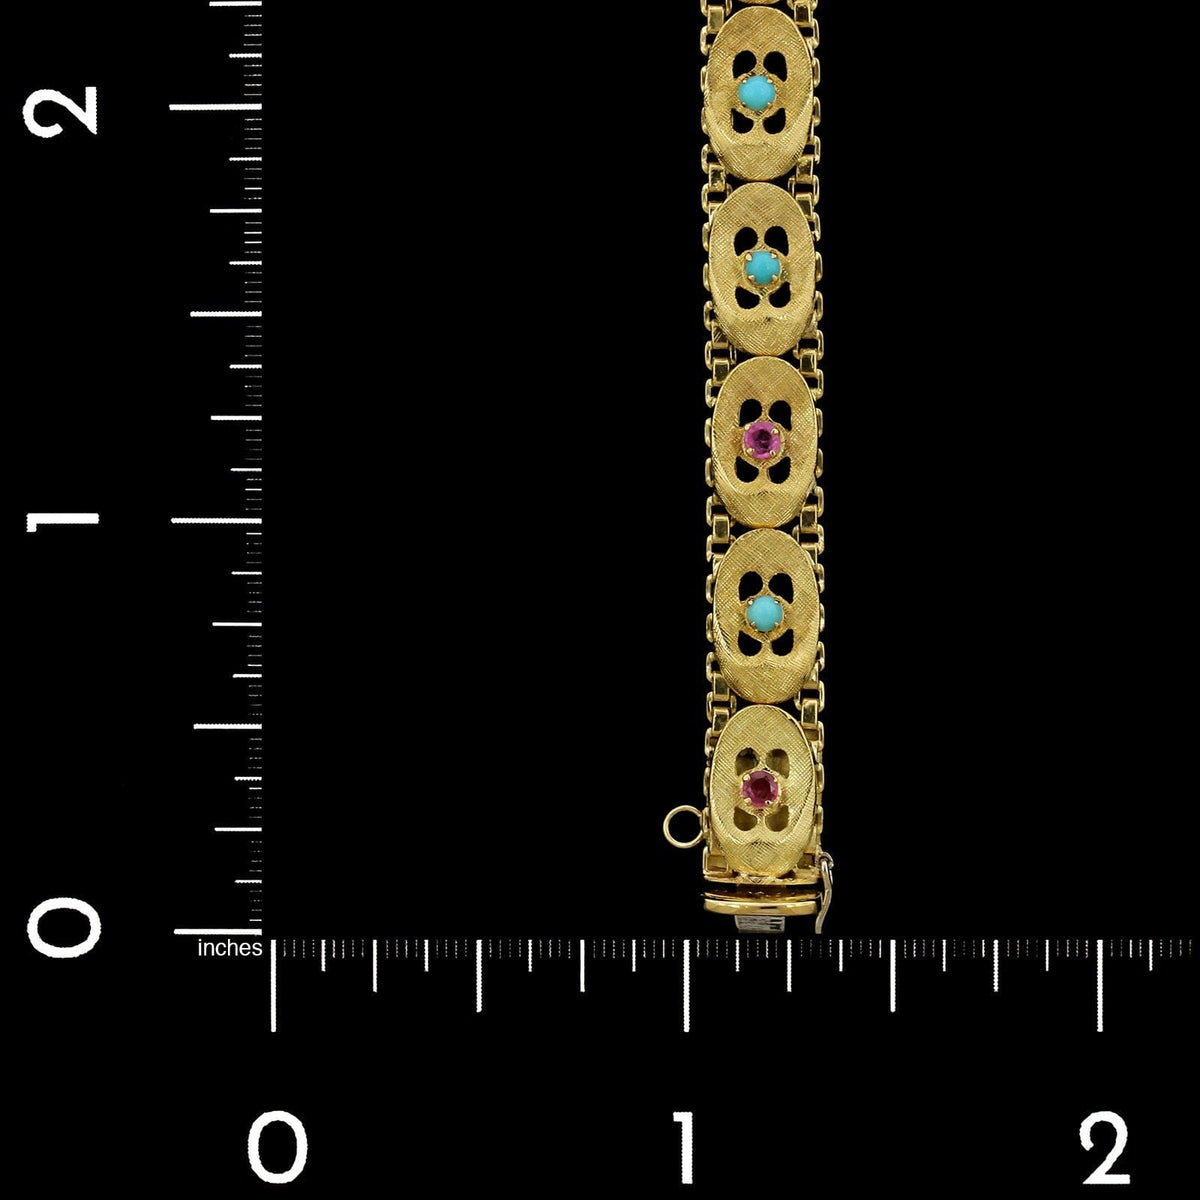 18K Yellow Gold Estate Turquoise and Ruby Bracelet